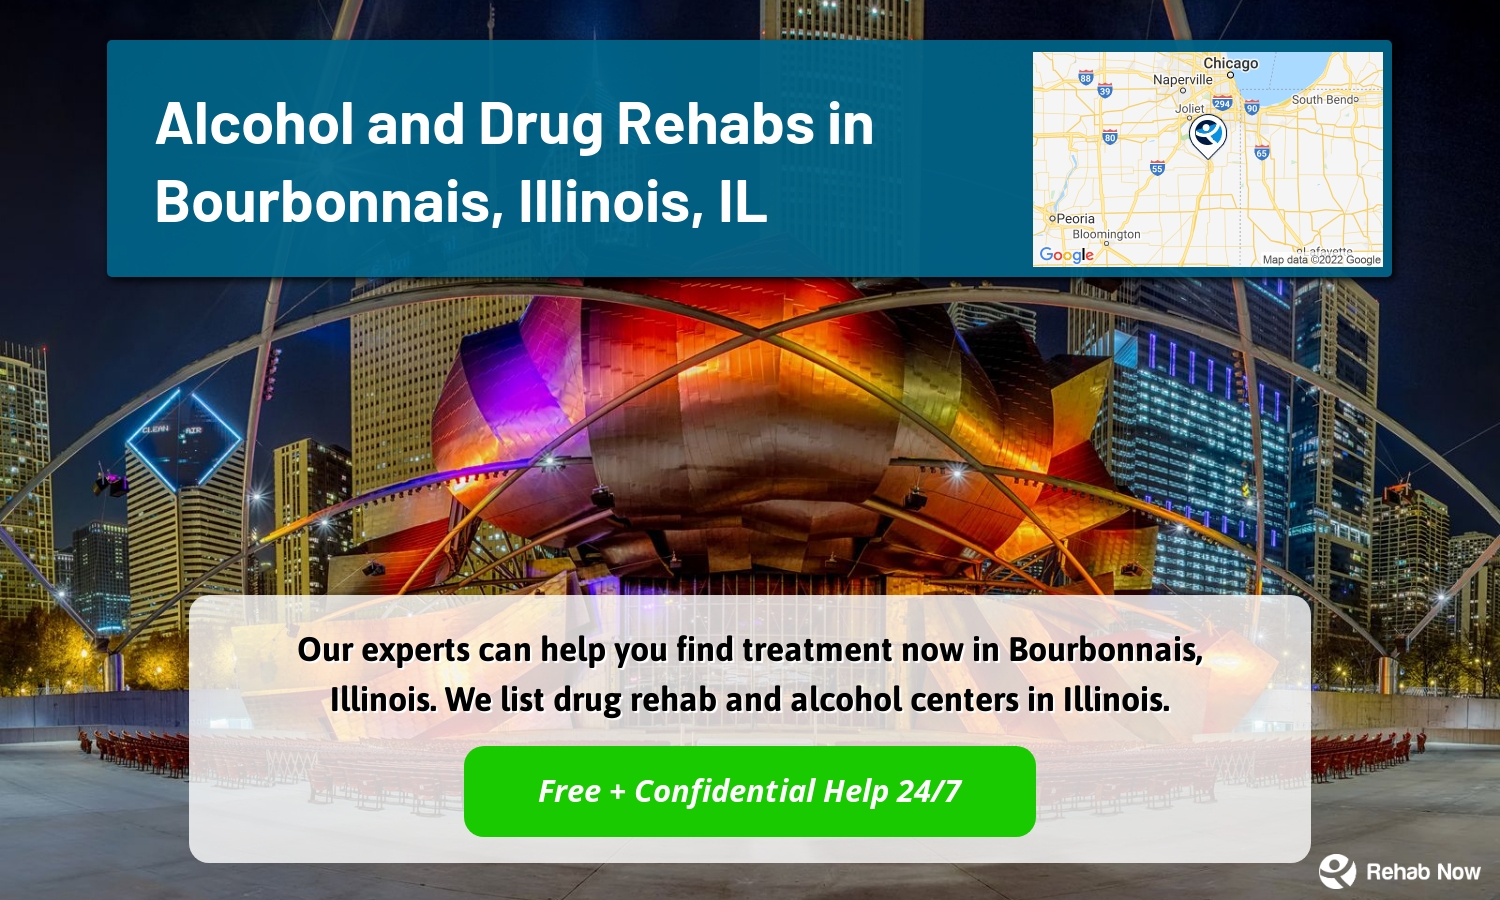 Our experts can help you find treatment now in Bourbonnais, Illinois. We list drug rehab and alcohol centers in Illinois.